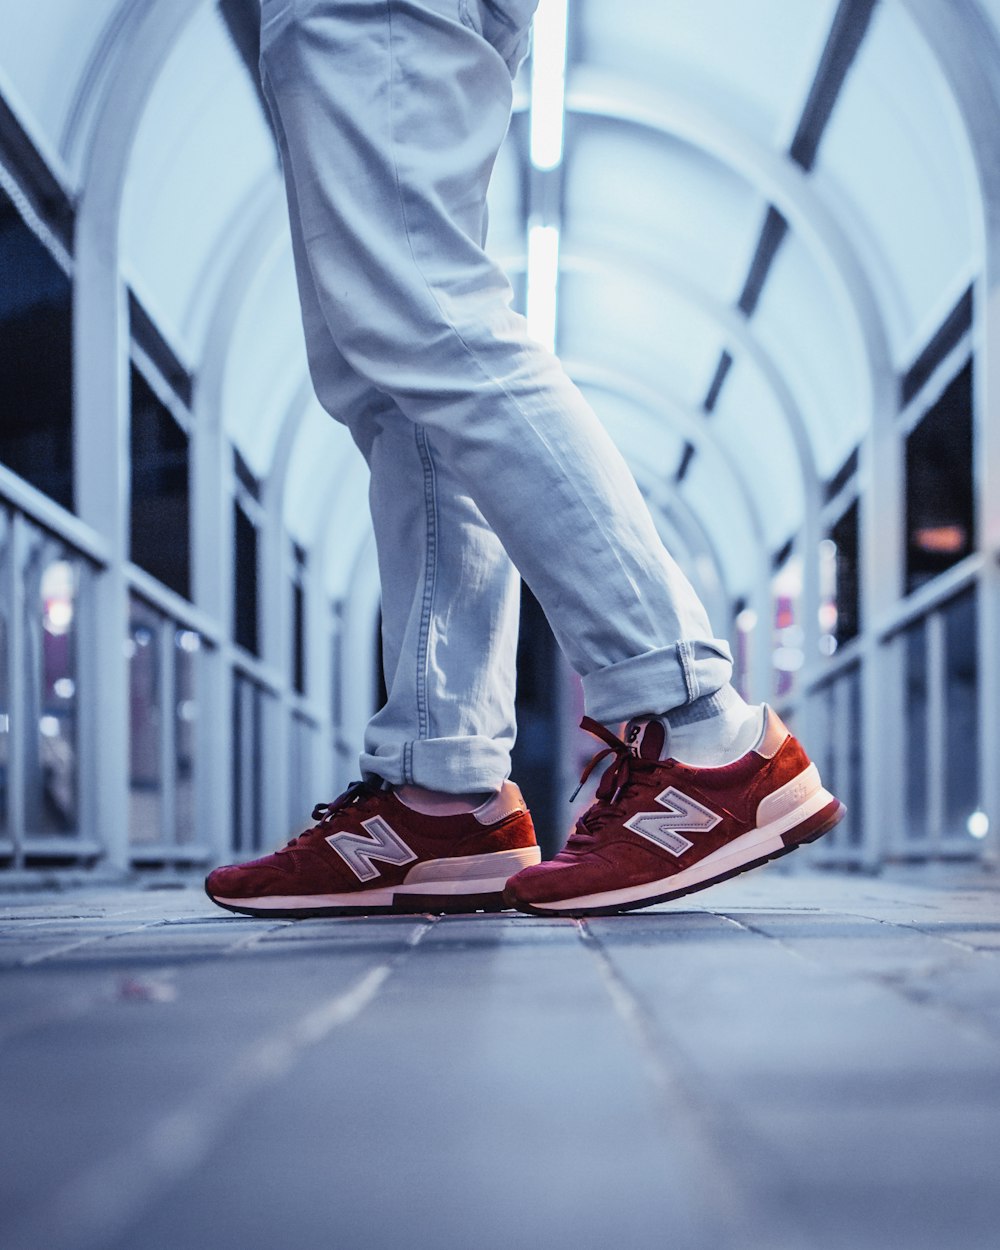 Person wearing pair of red New Balance low-top sneakers photo – Free Nike  Image on Unsplash